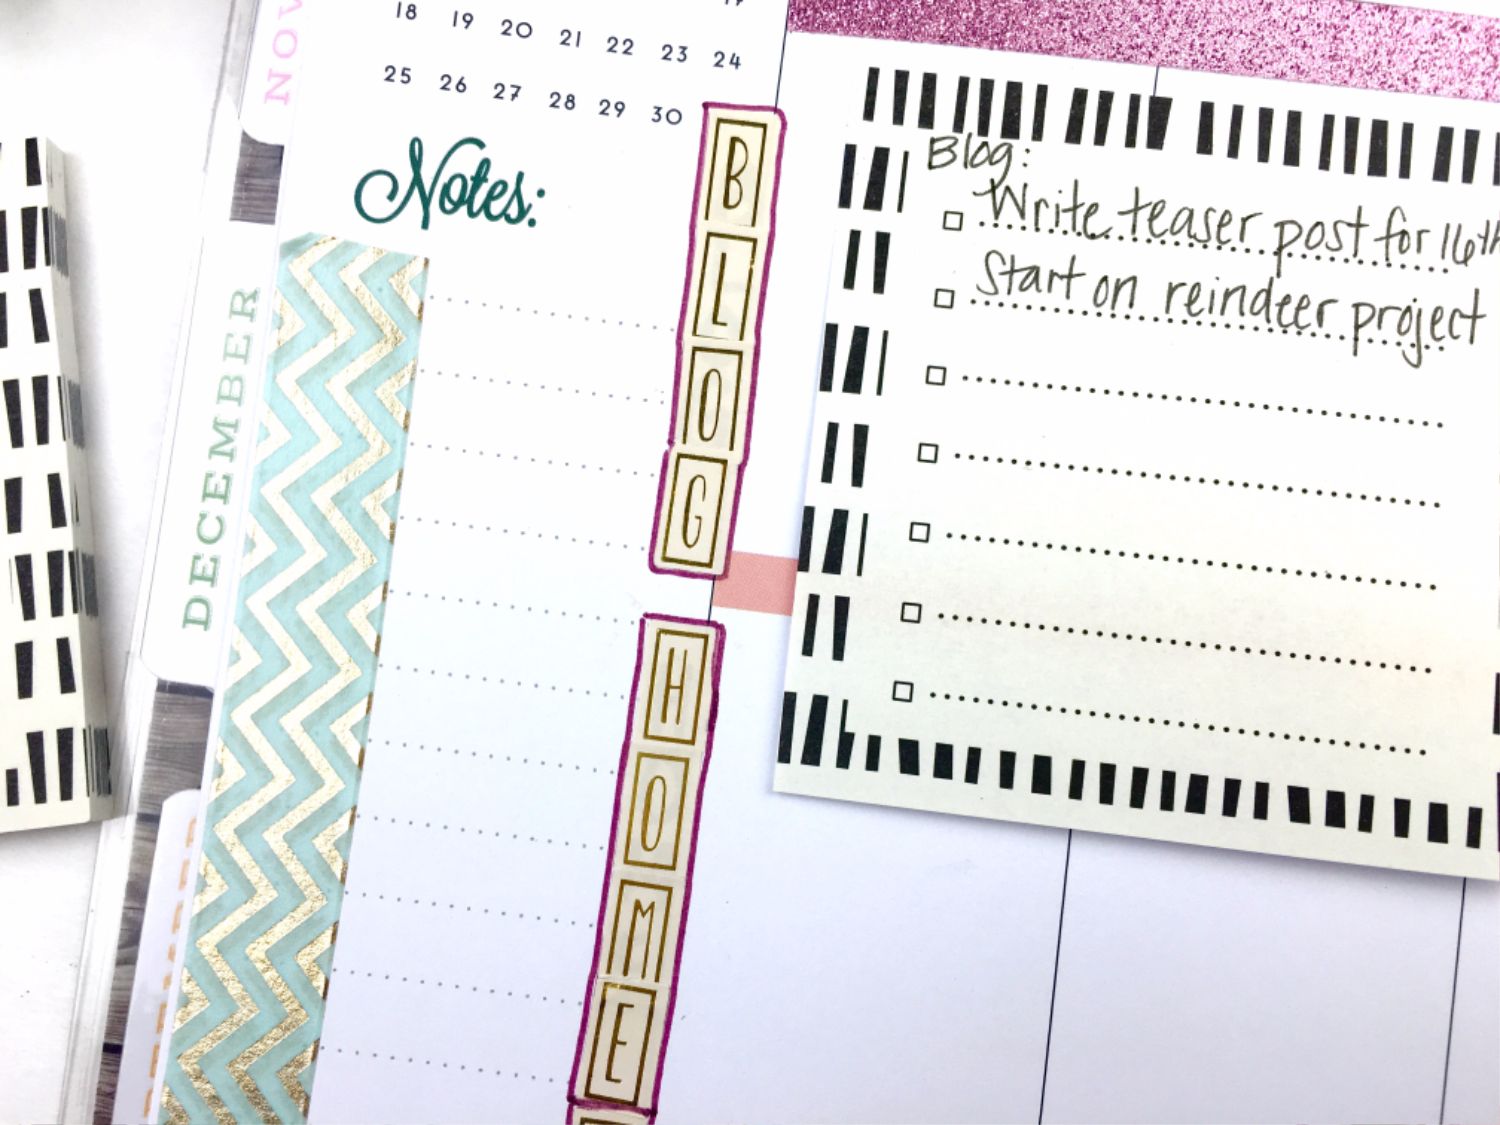 Using a Planner to Organize and Balance Everyday Life